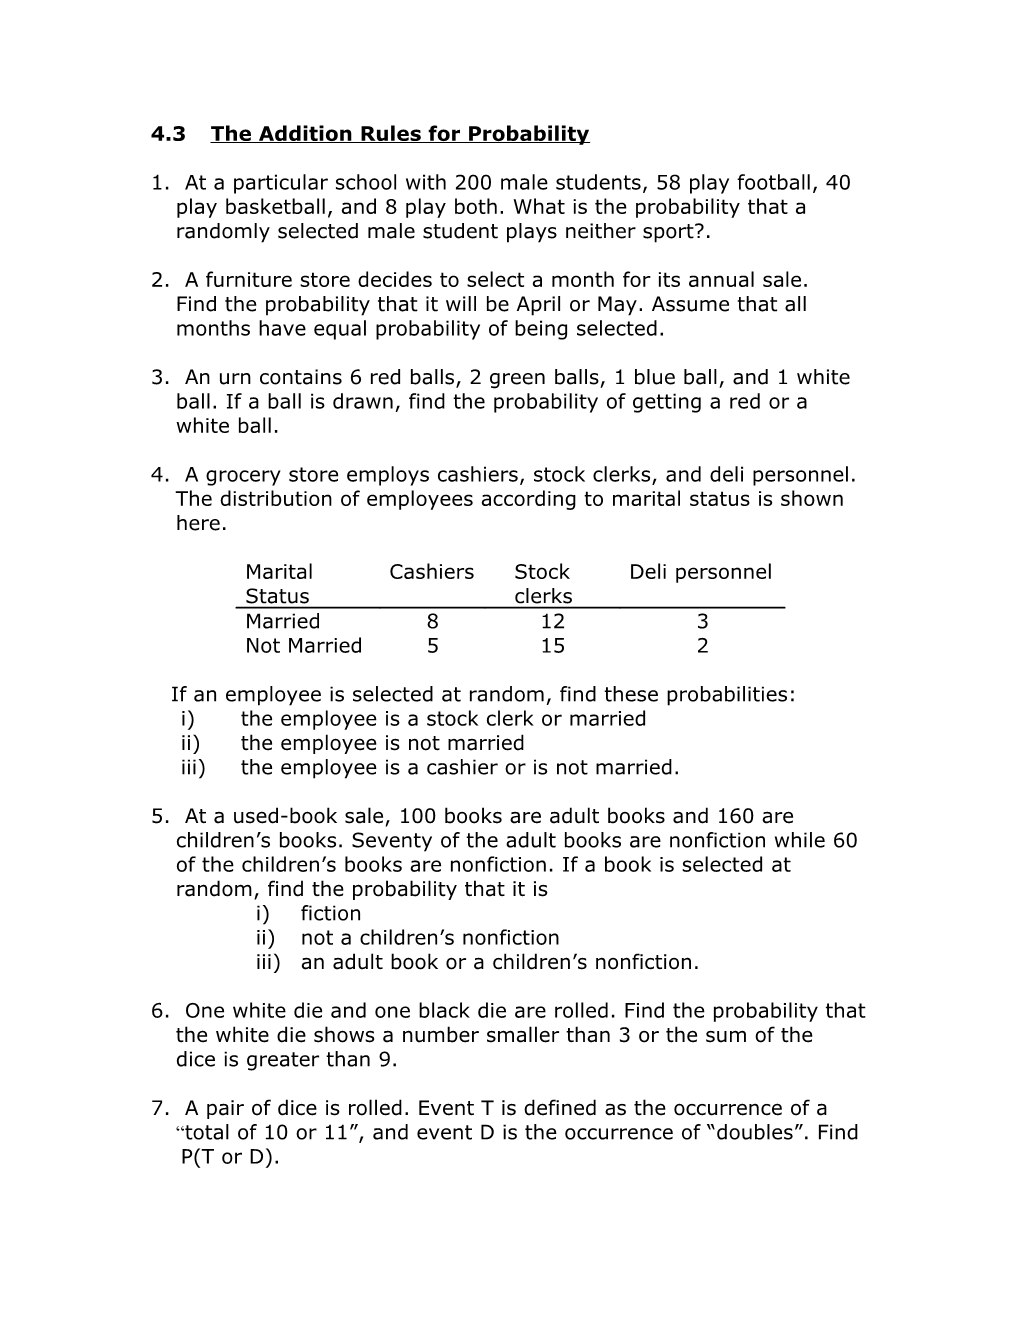 4.3 the Addition Rules for Probability